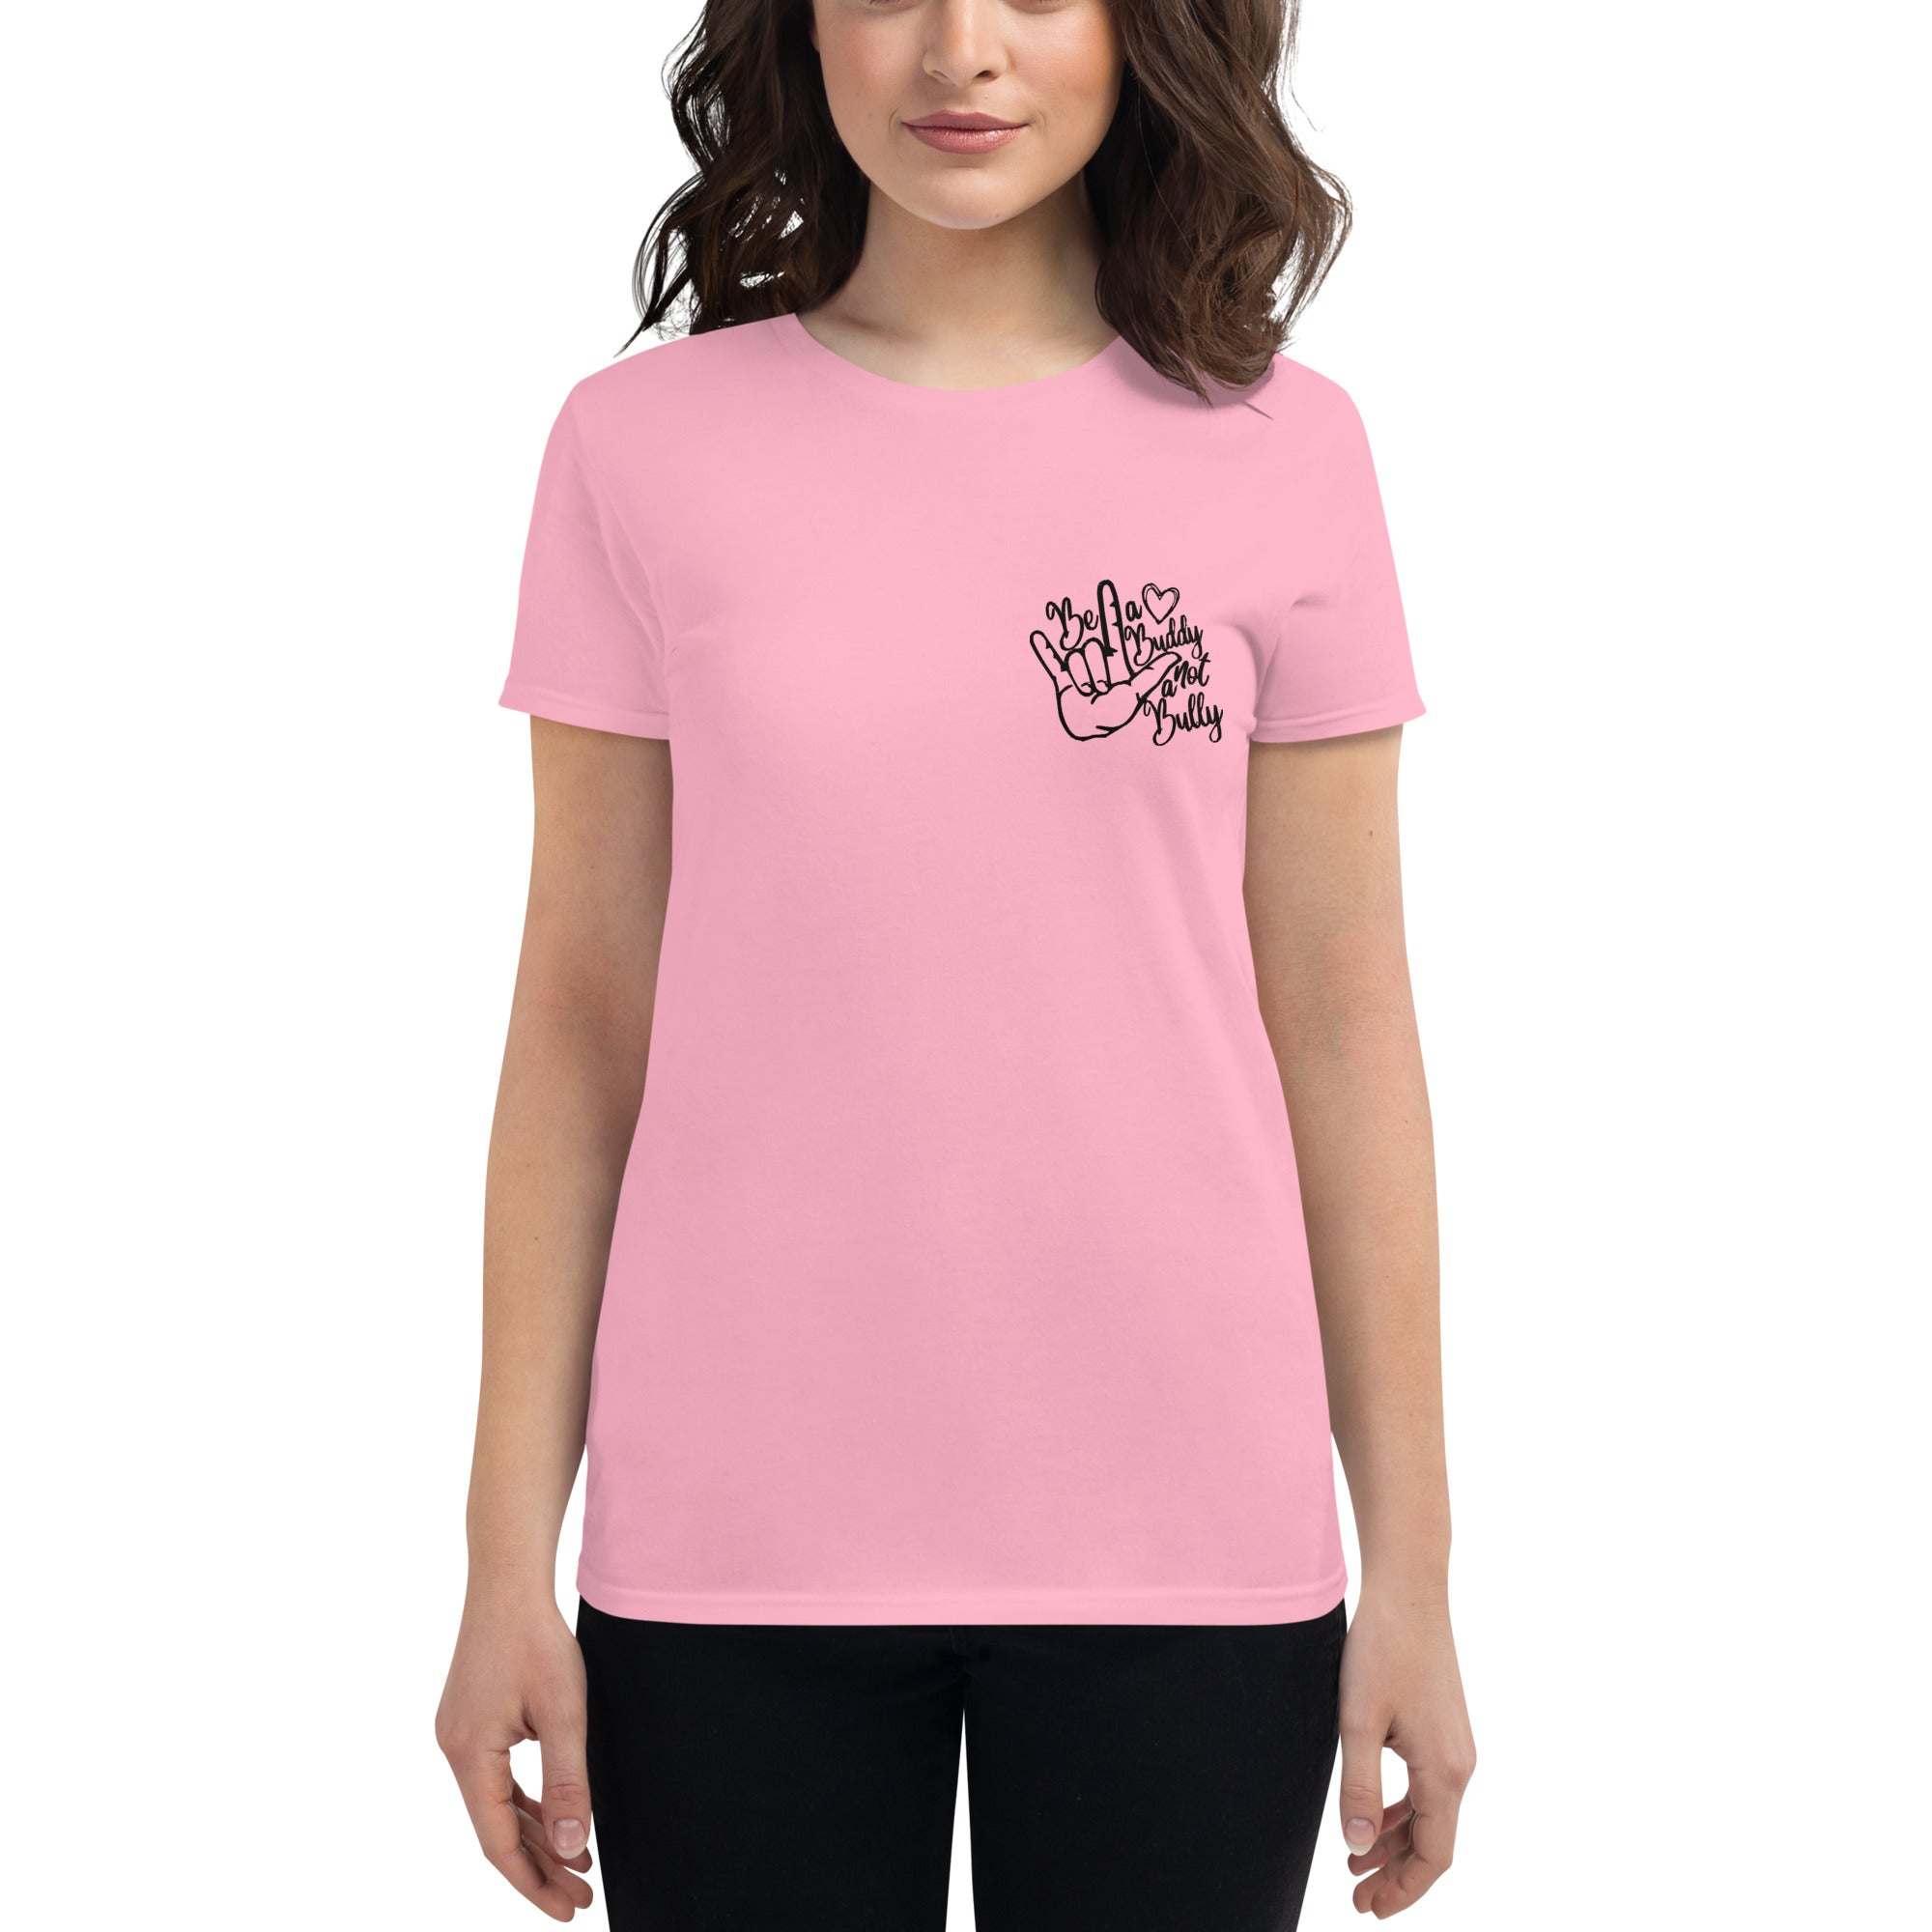 Be a Buddy Not a Bully Embroidered Women's Short Sleeve T-shirt